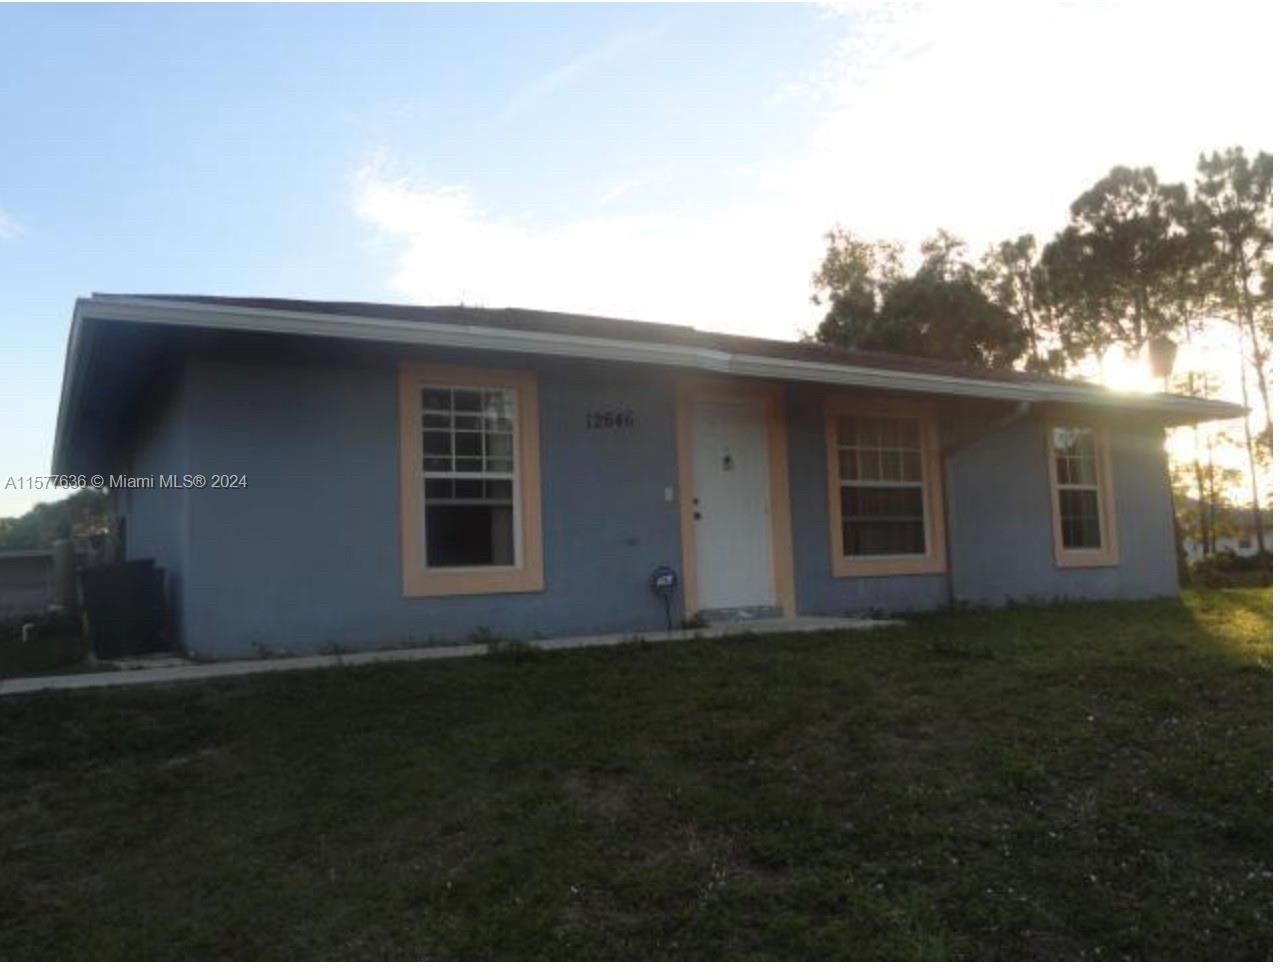 This Home has 3 bedrooms and 2 bathrooms and is located on 1.10 acres. It features tile, wood, and c